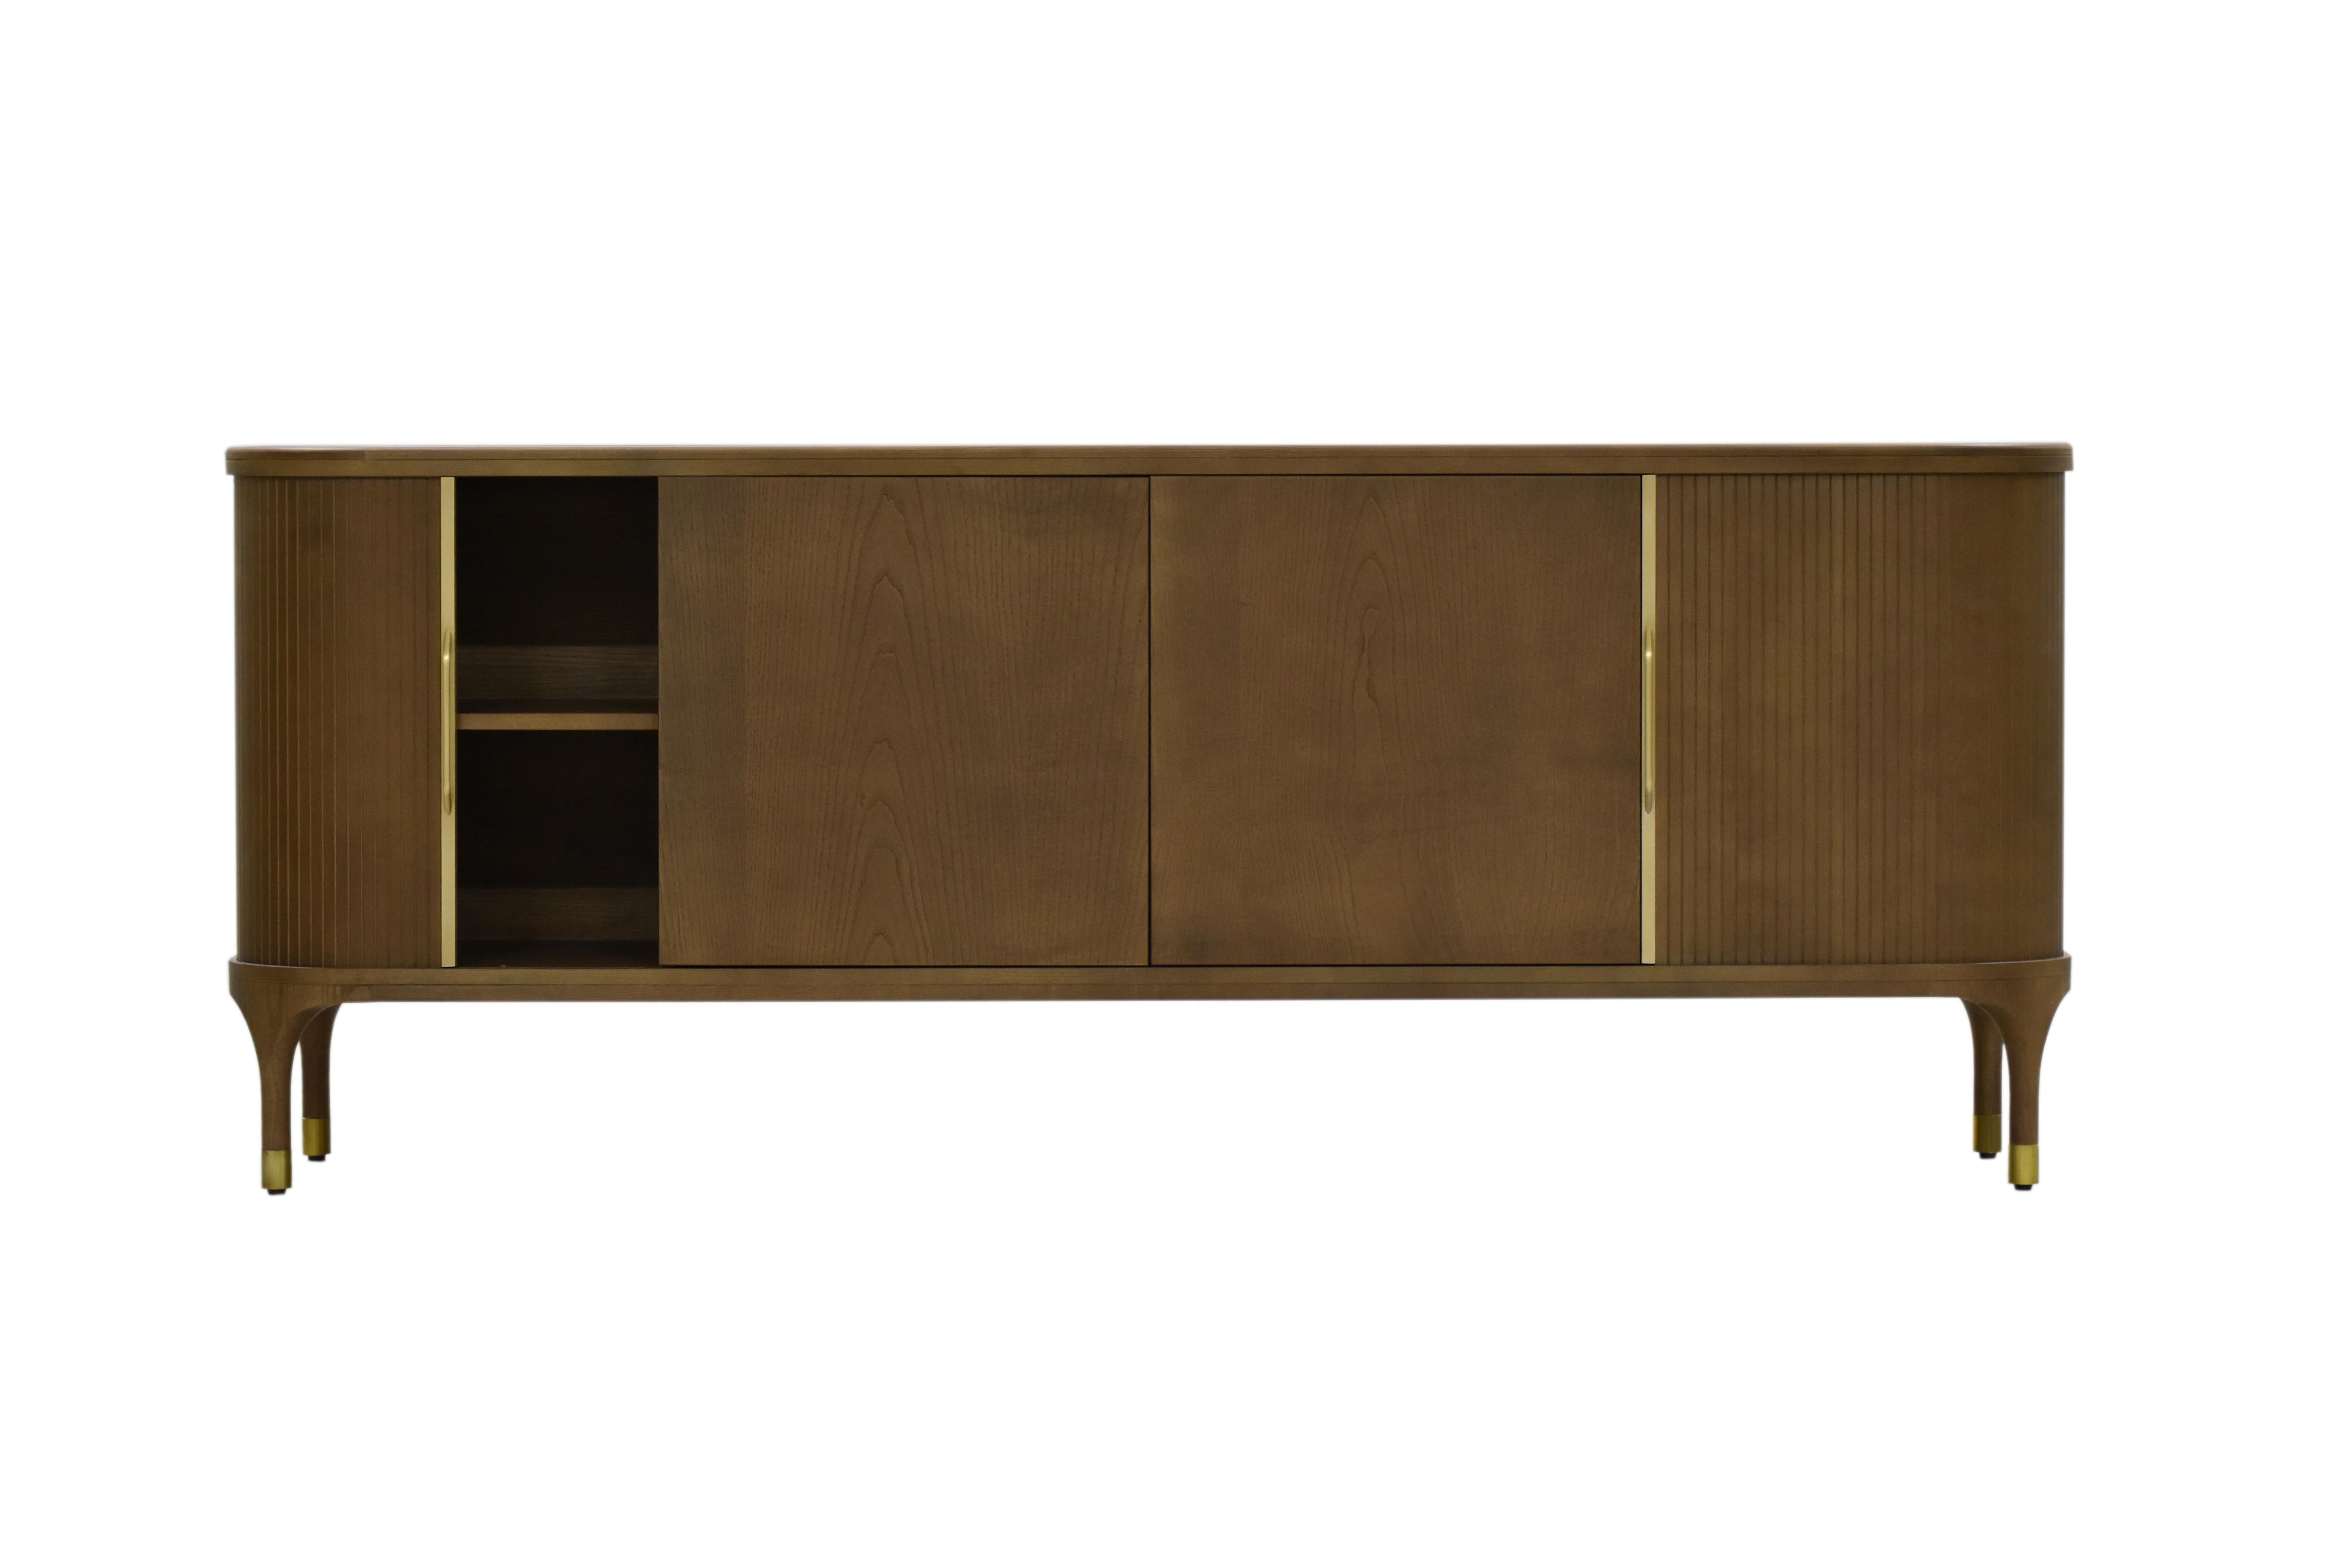 Joyce Contemporary Sideboards in Ashwood with Sliding Doors 5